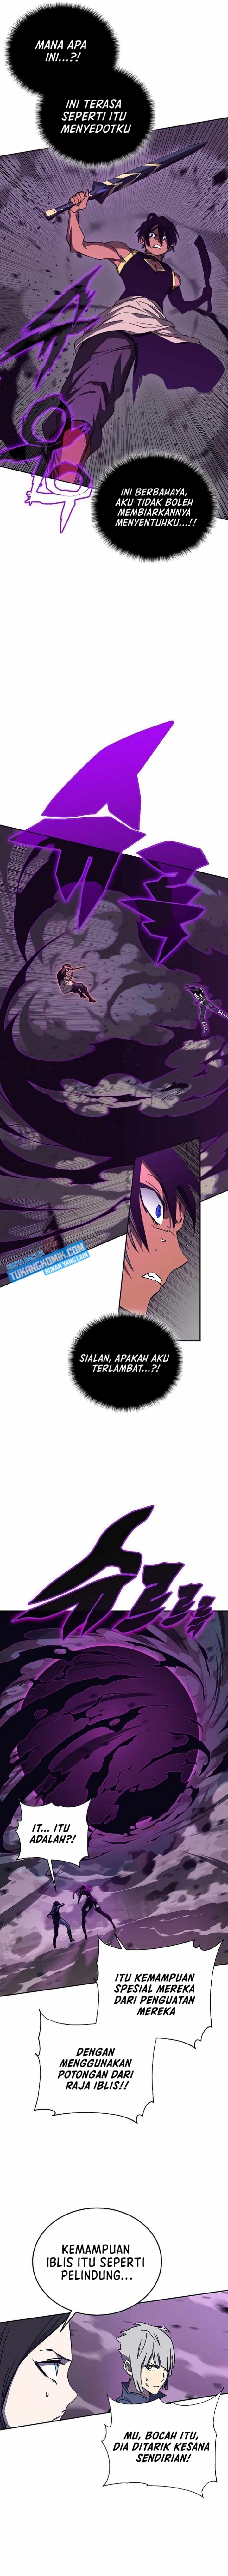 x-ash Chapter 49